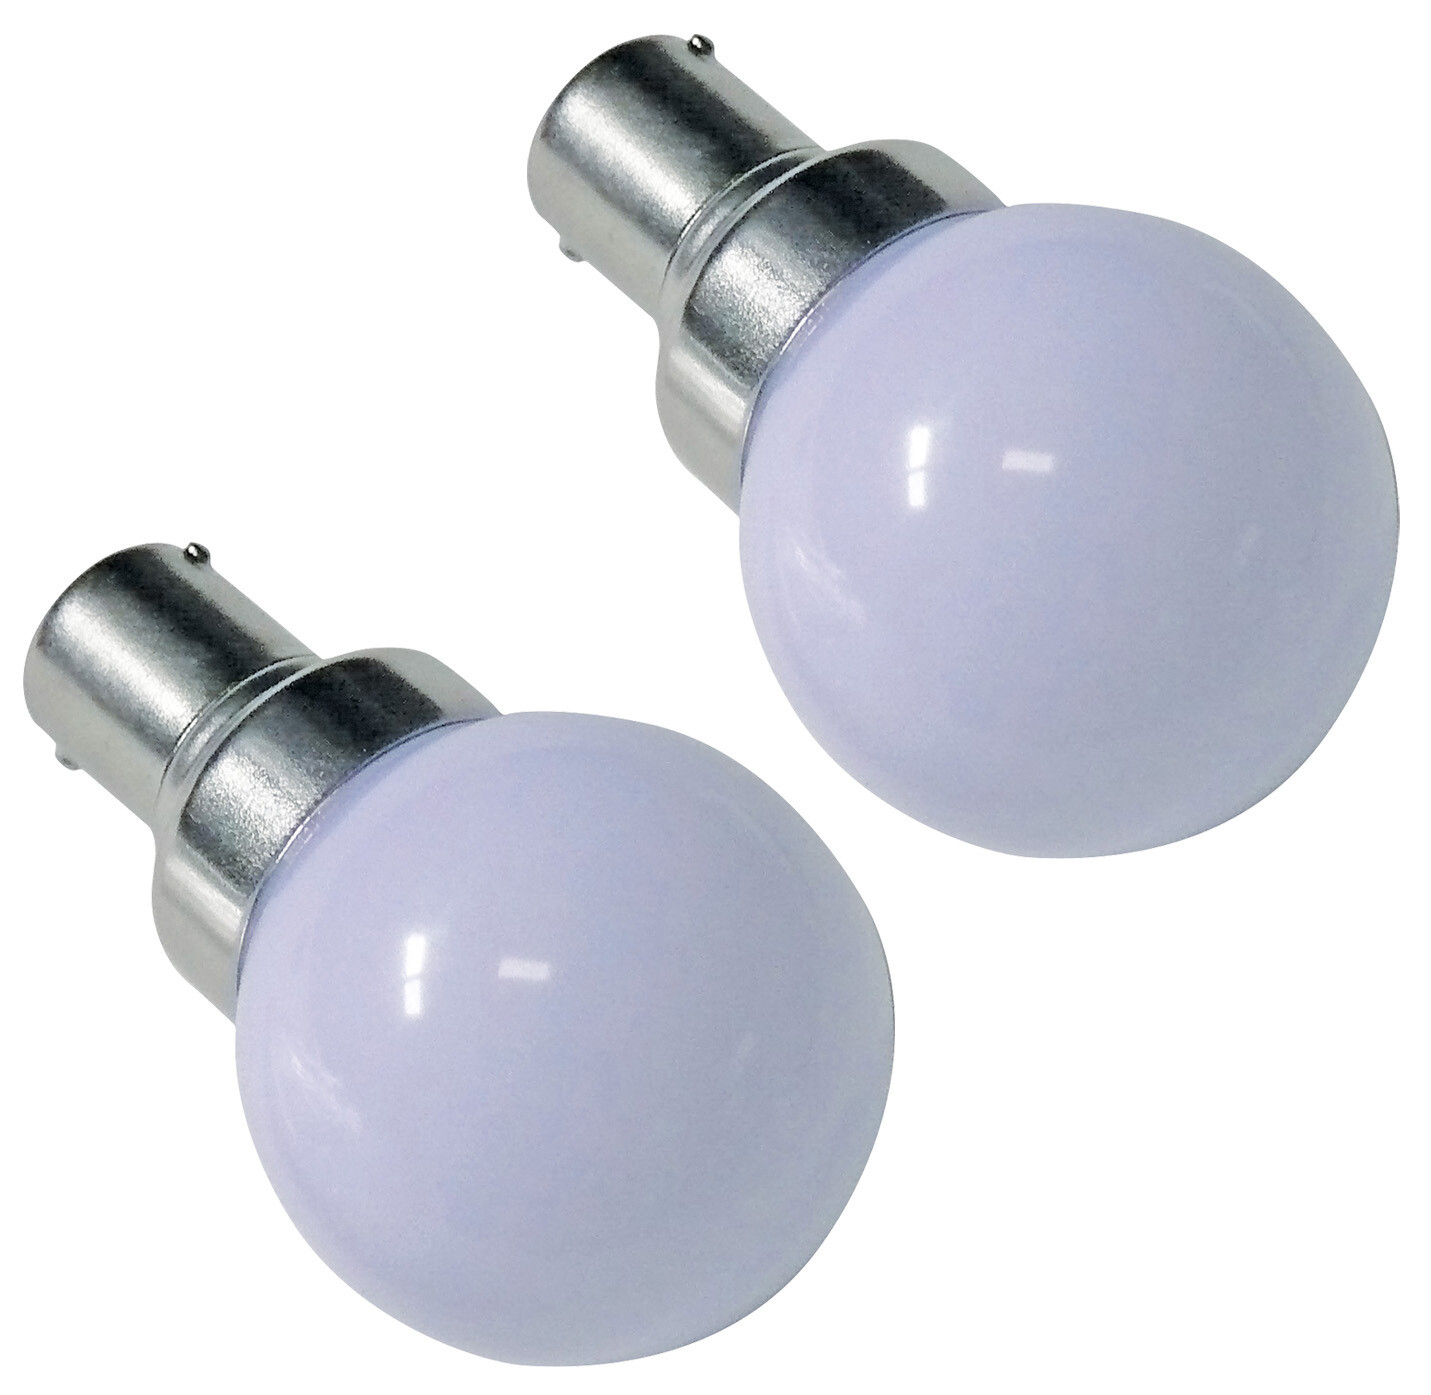 Vanity LED Bulb Replacement for 20-99. Soft White